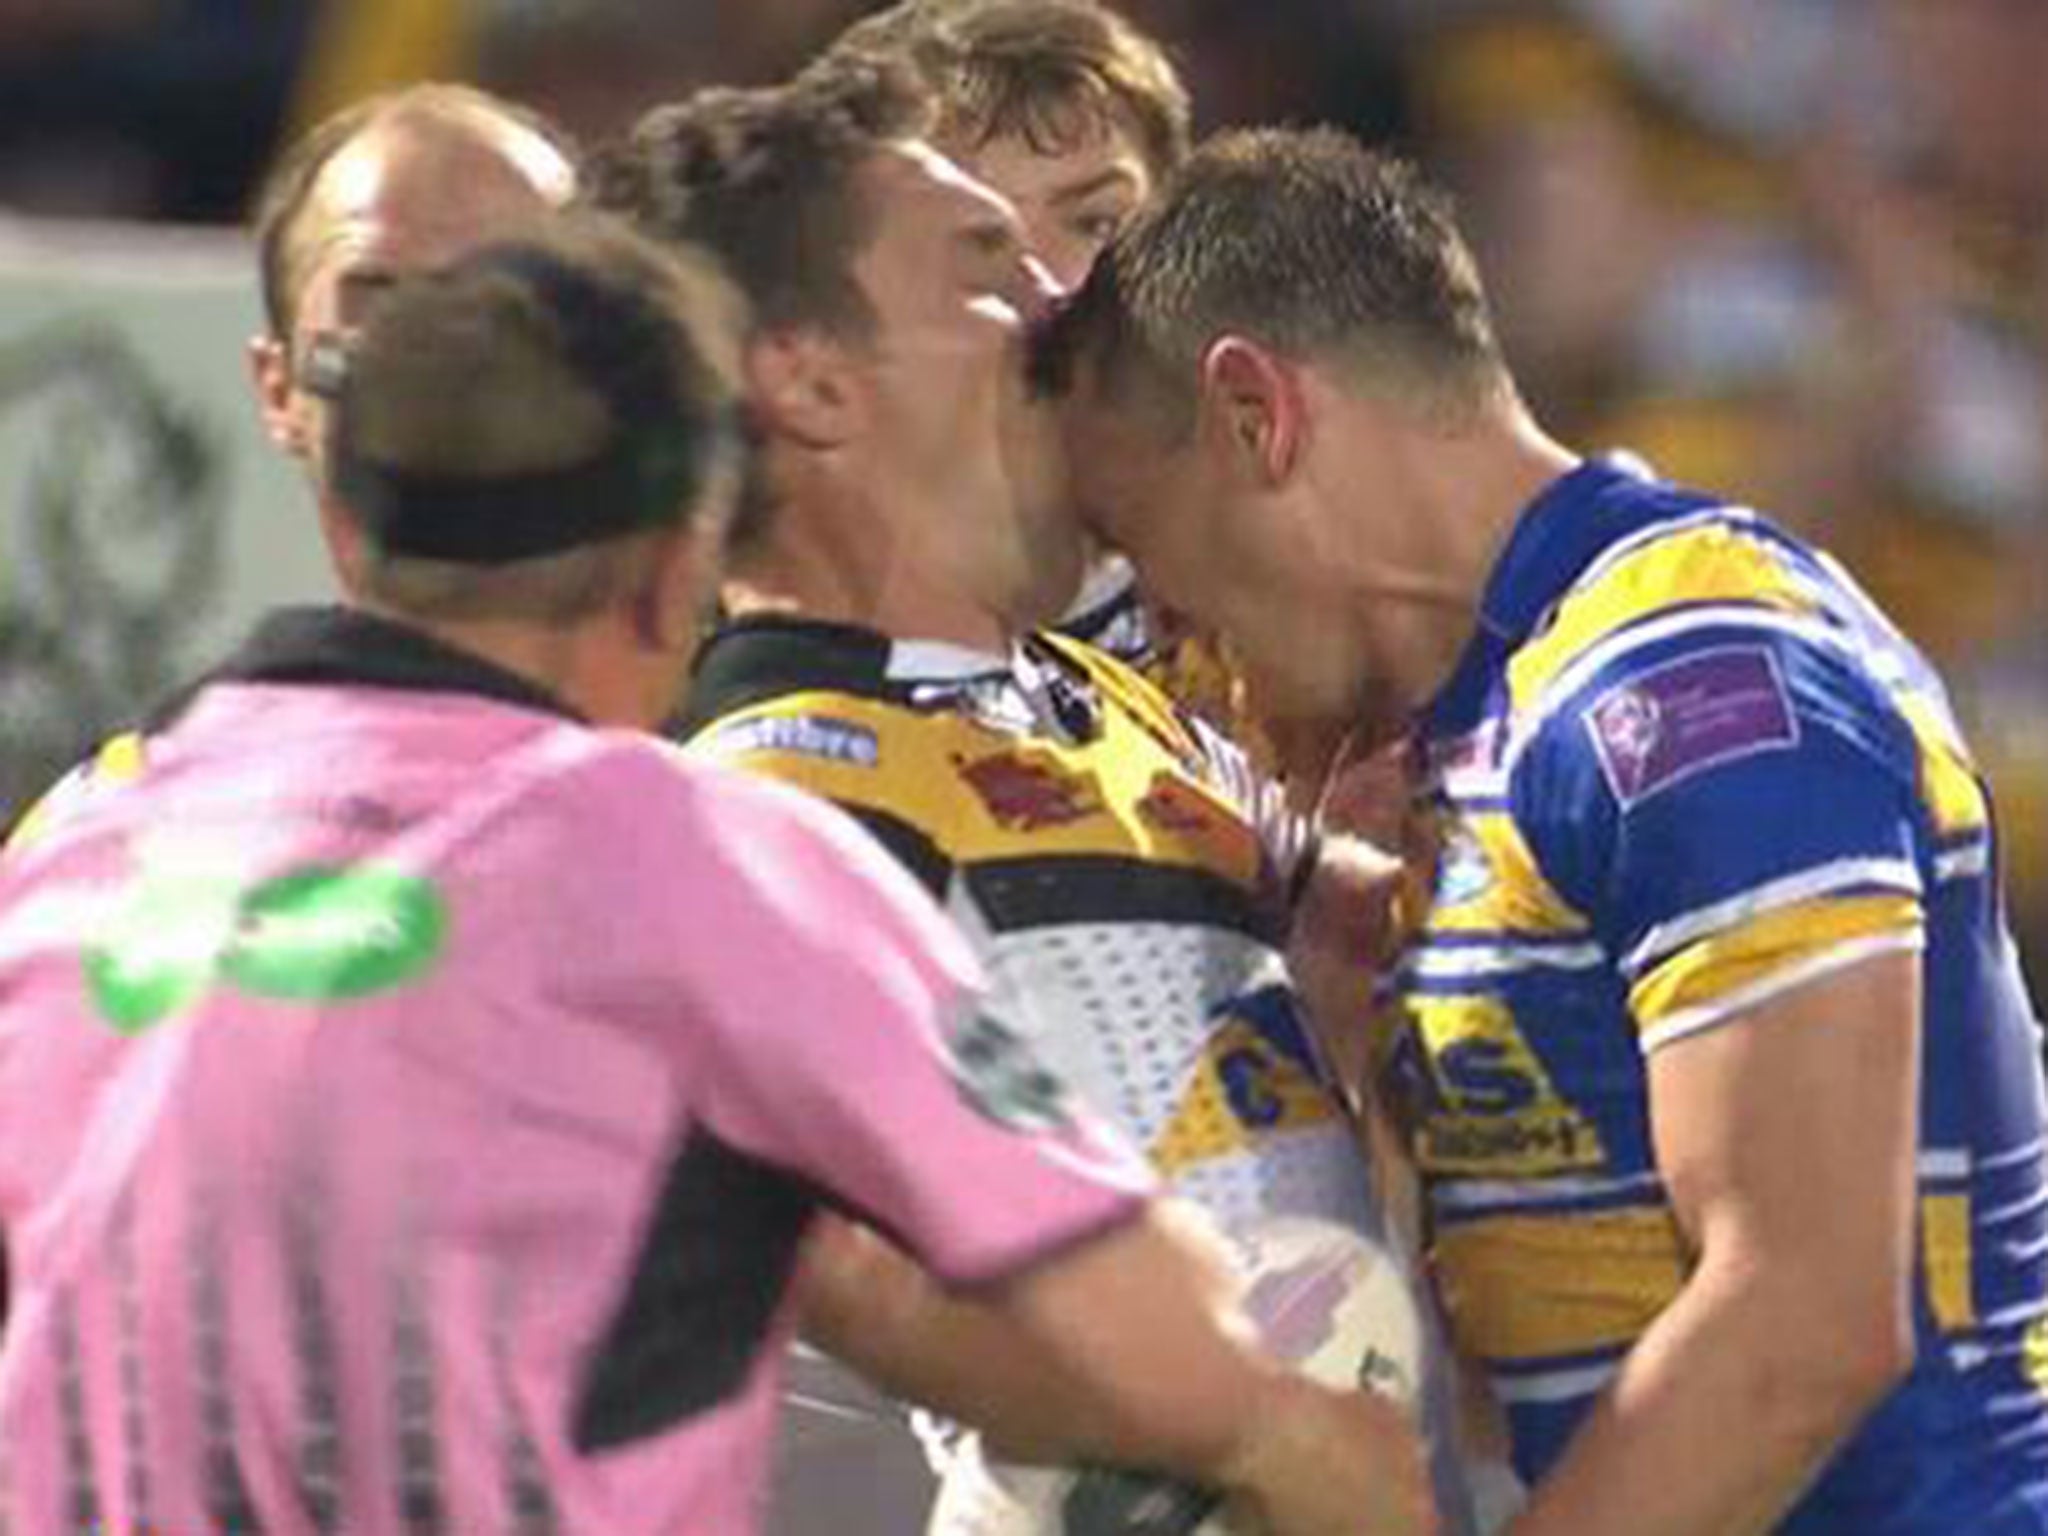 Kevin Sinfield headbutts Luke Dorn during the 24-24 draw between Leeds and Castleford